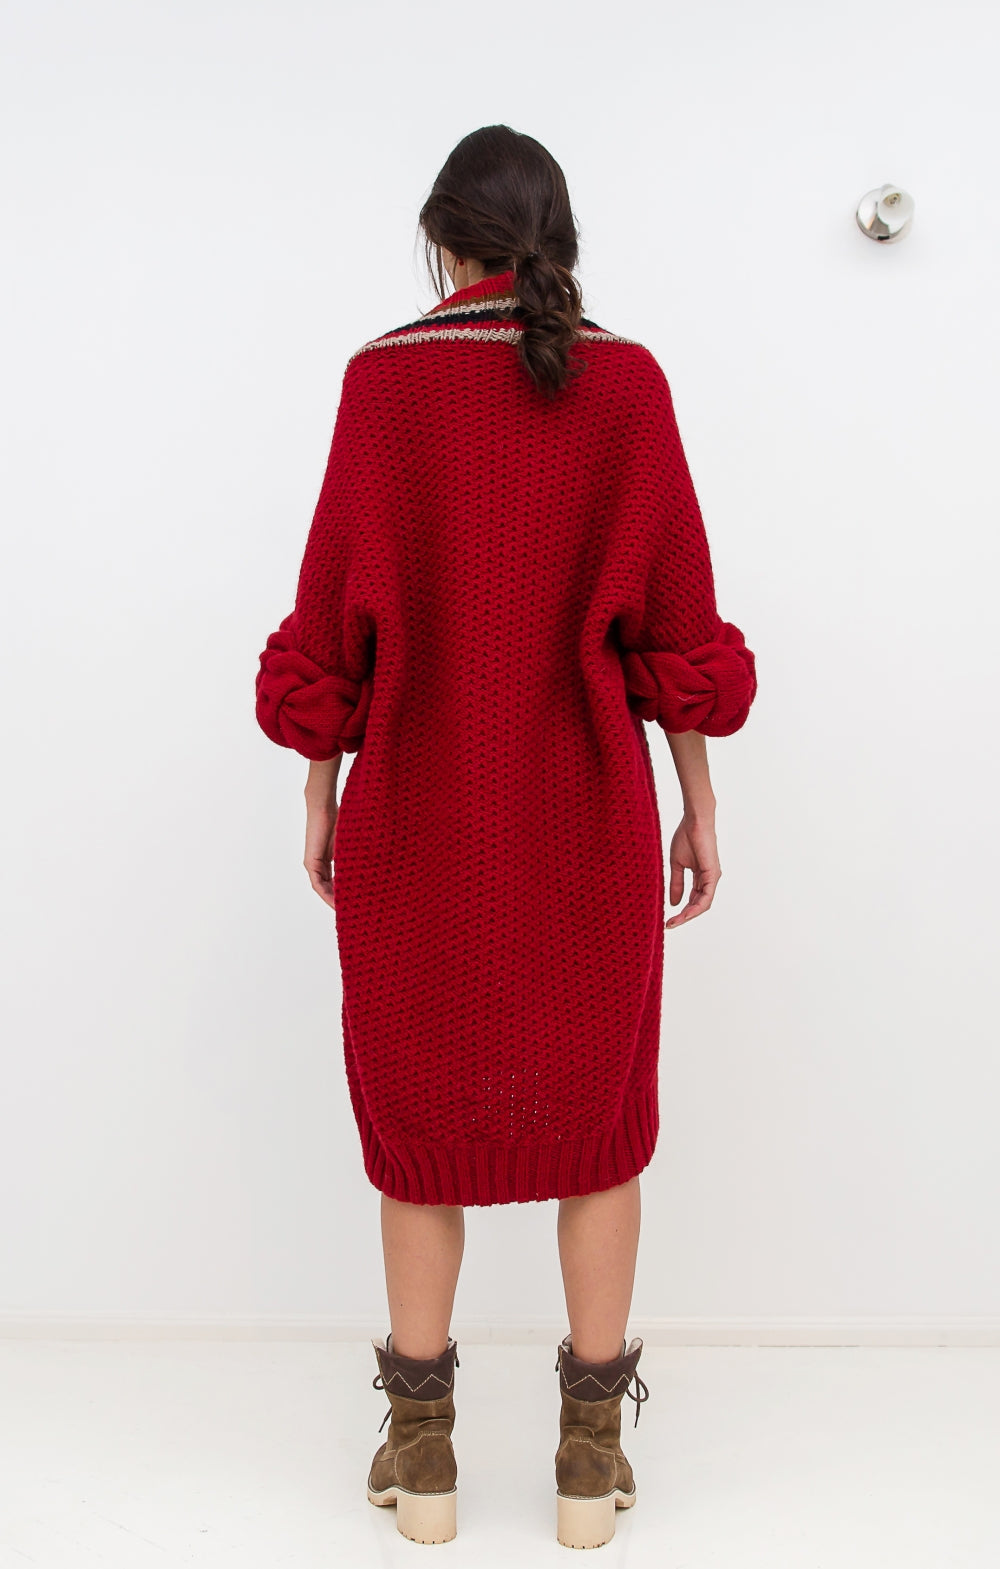 Knitted red cardigan back view